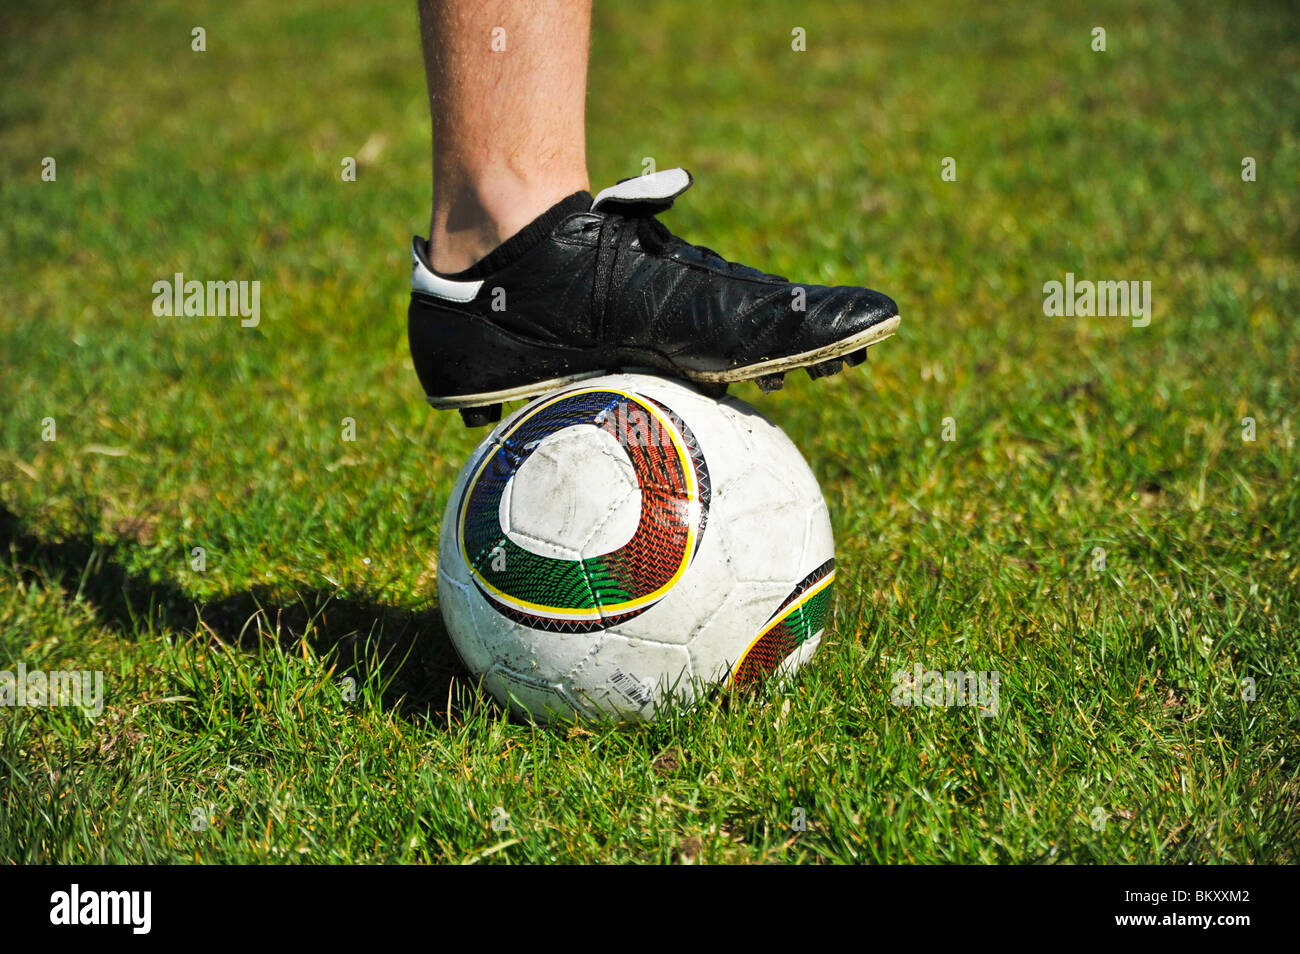 A close up view of a male soccer player's foot on a soccer ball Stock Photo